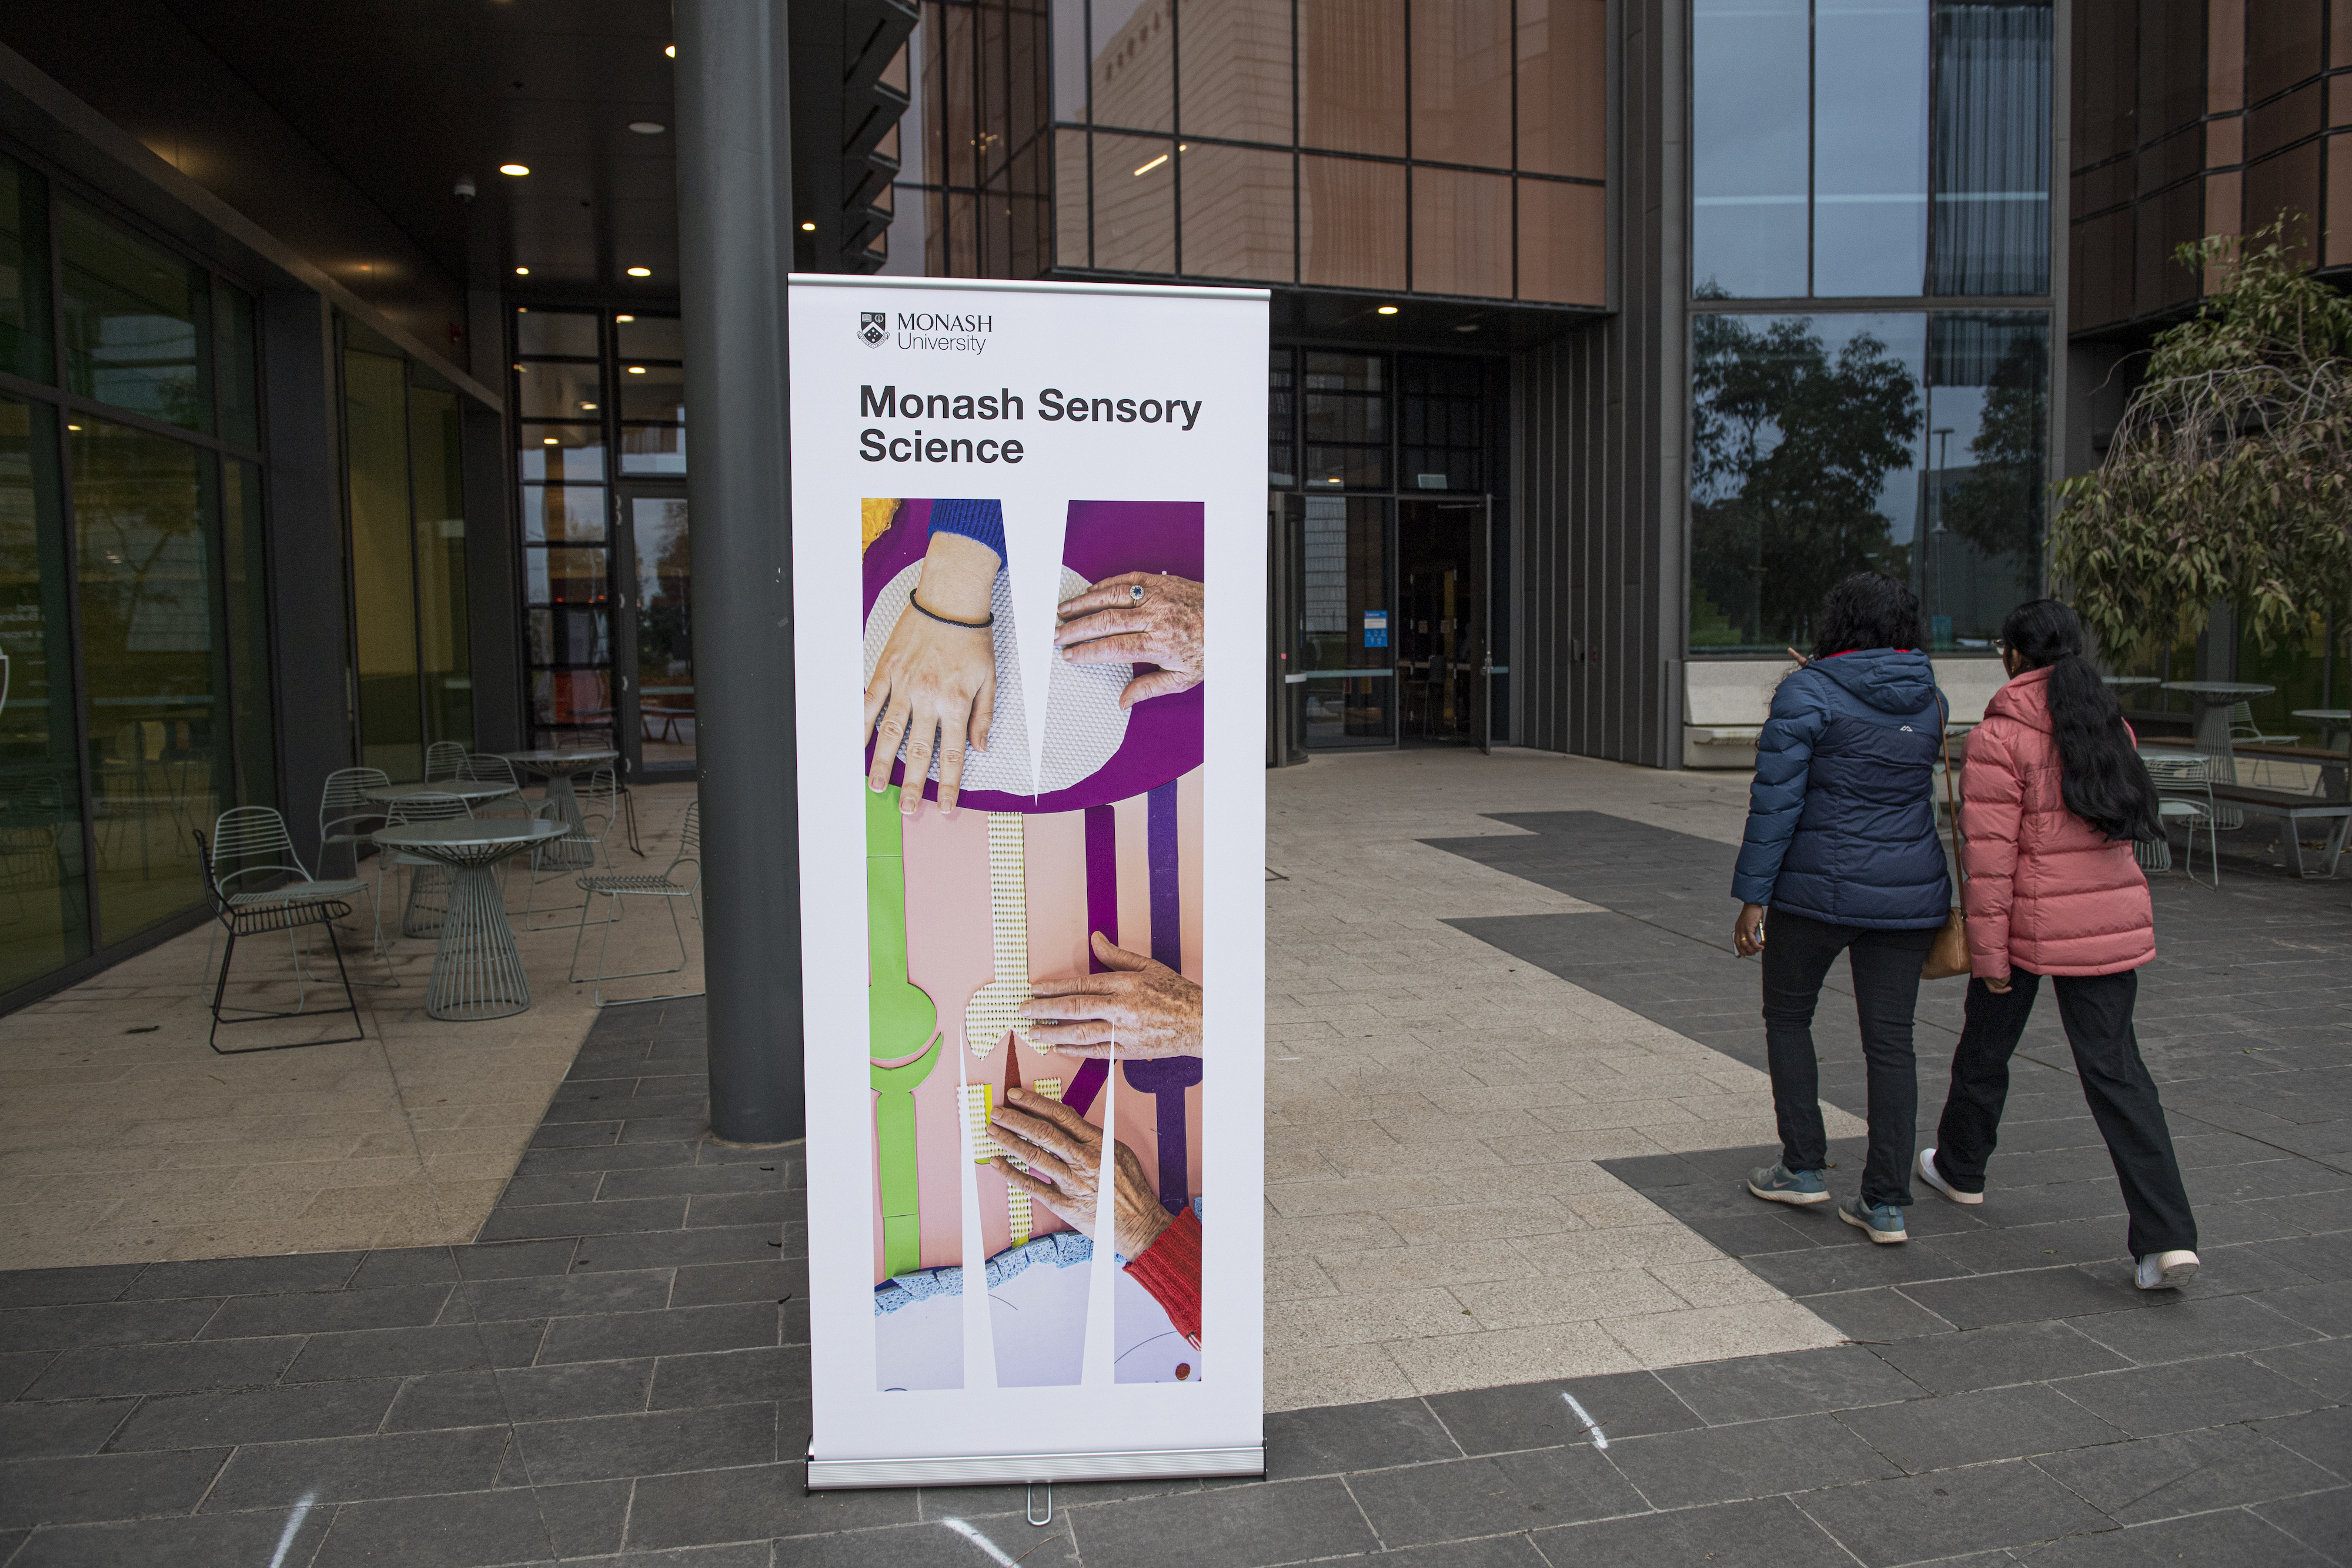 A Monash Sensory Science pull-banner in front of an entrance to a Monash University building. Two women with dark black hair wearing puffer jackets are walking towards the doorway.